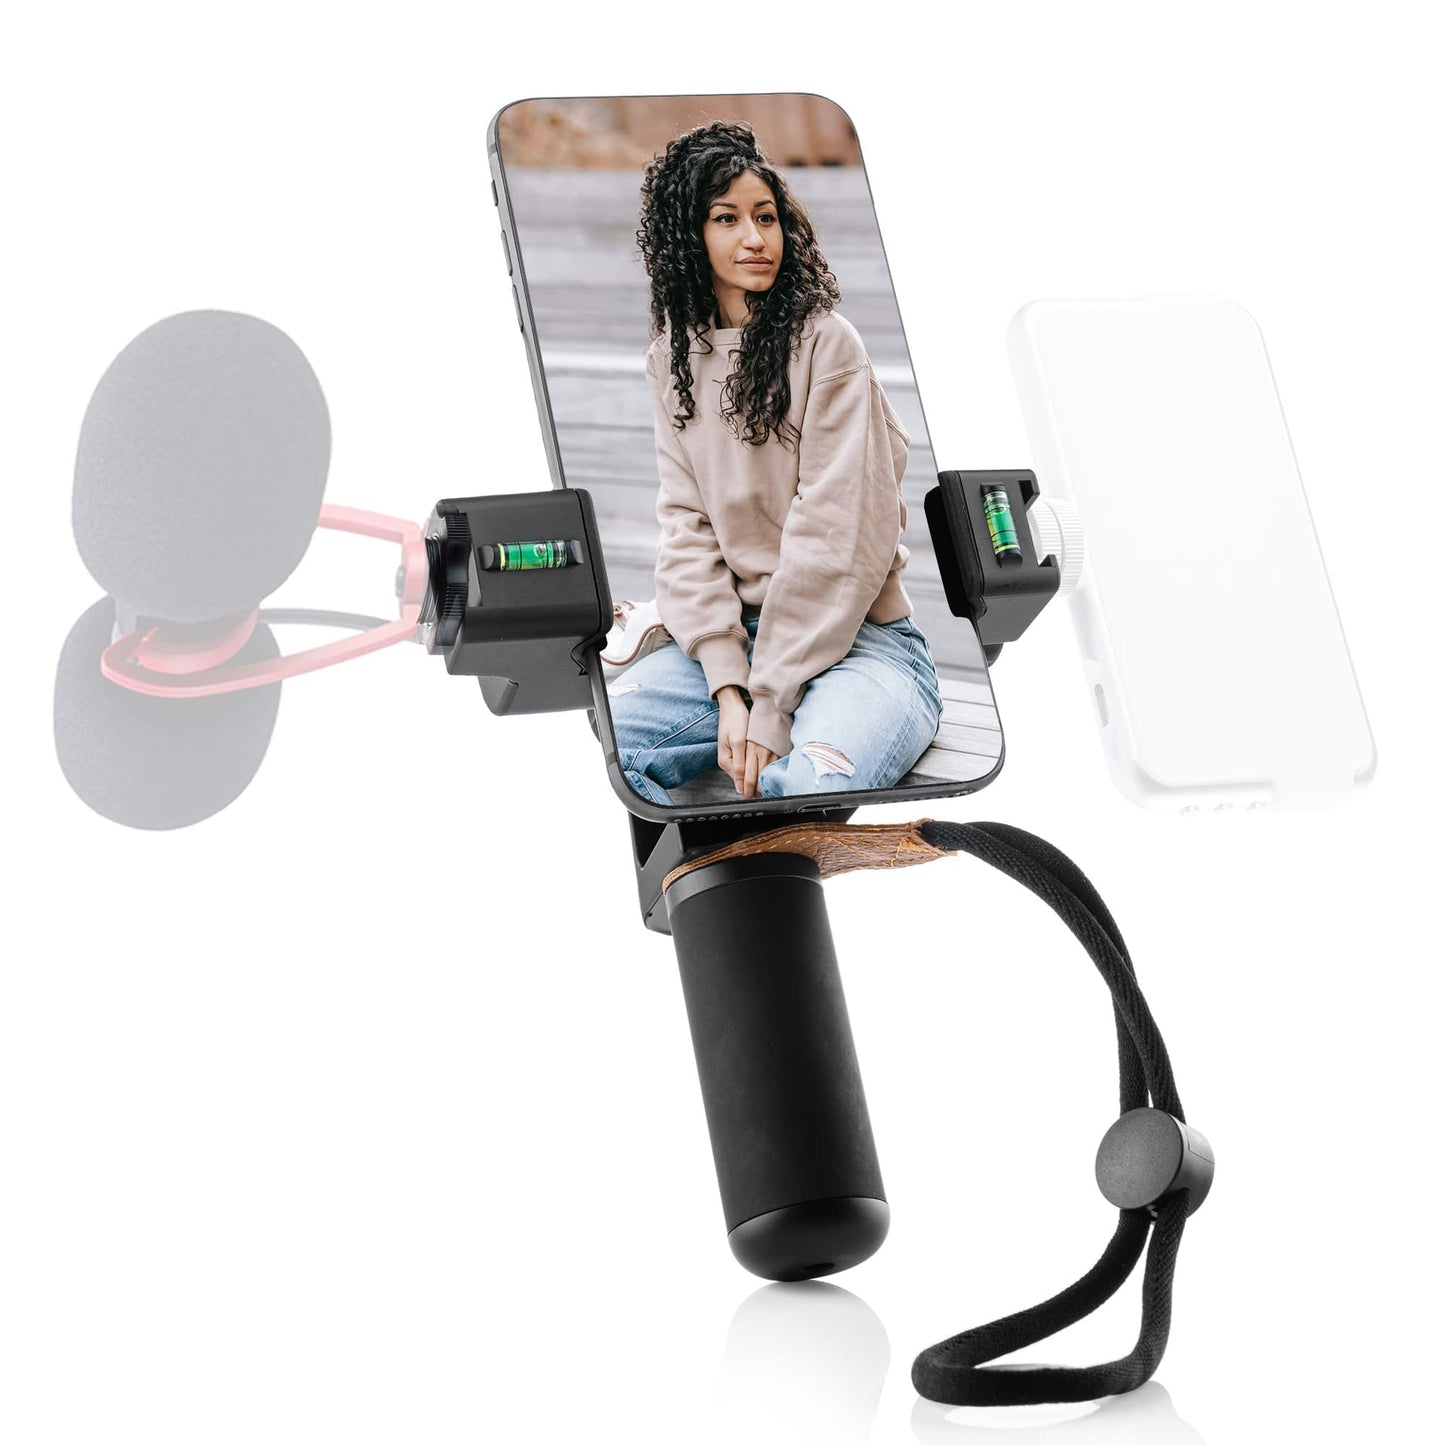 Sevenoak SK-PSC3 360 degrees rotatable phone holder with cold shoe, grip handle and tripod mount